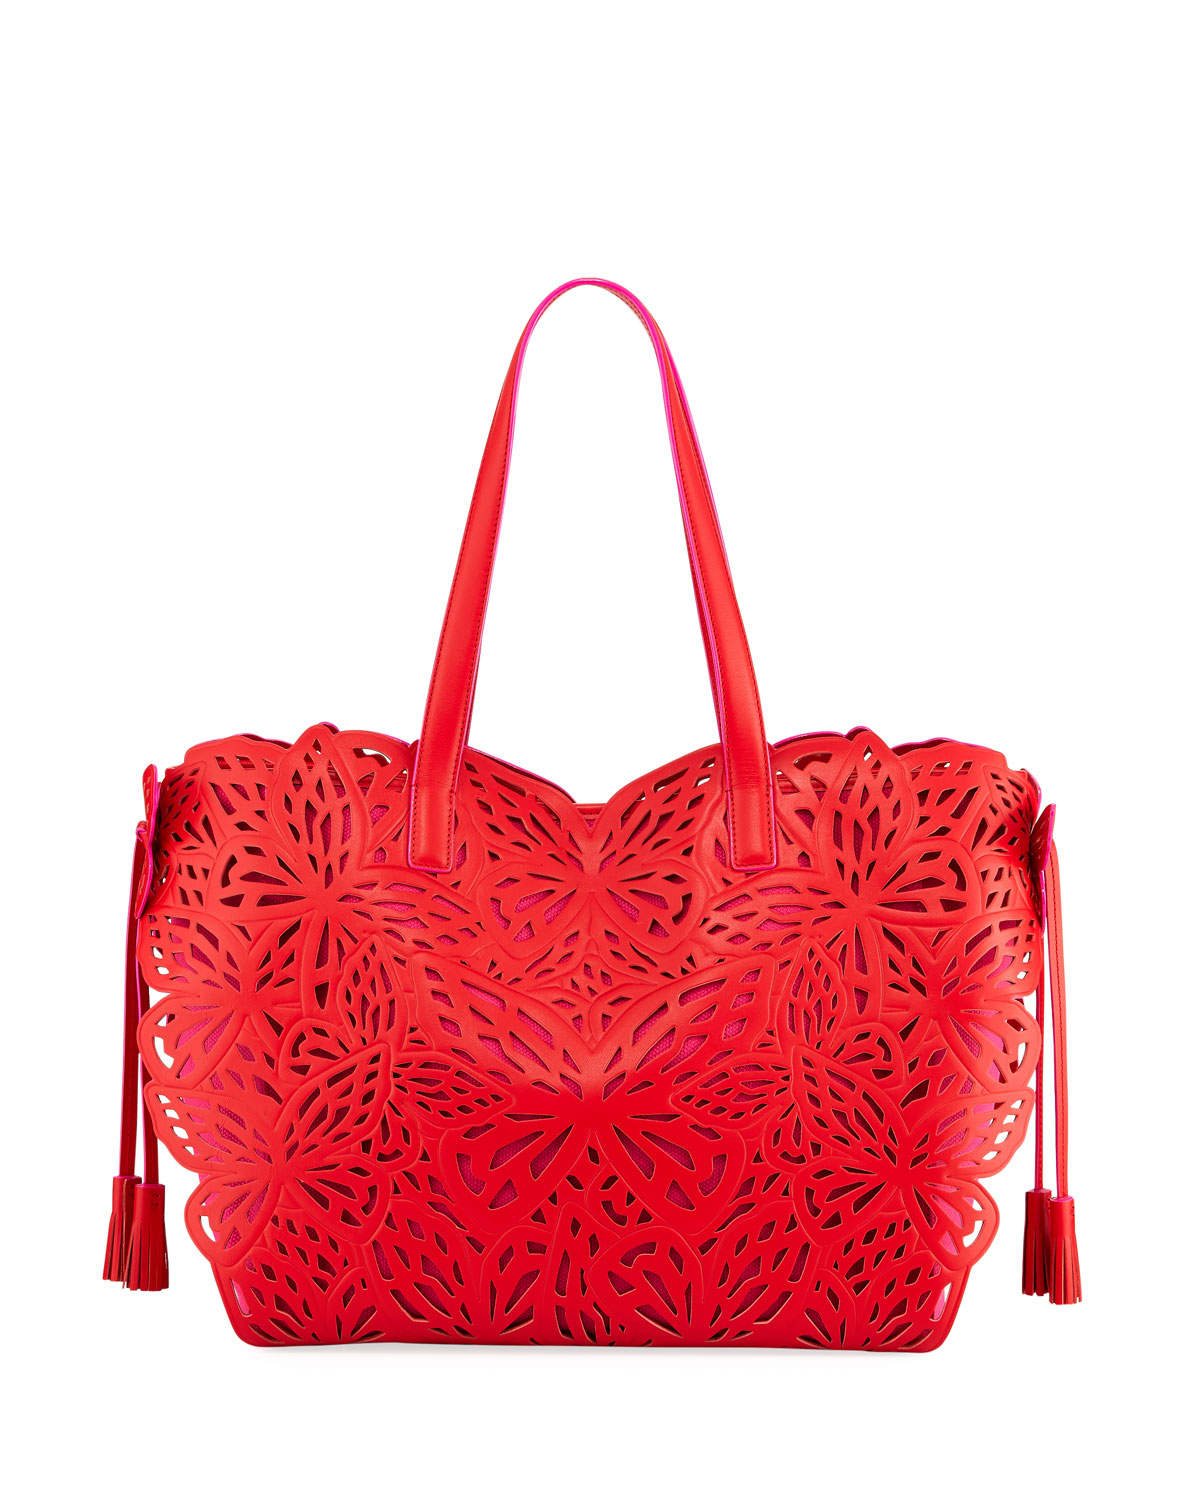 Liara Laser-Cut Leather Butterfly Tote Bag